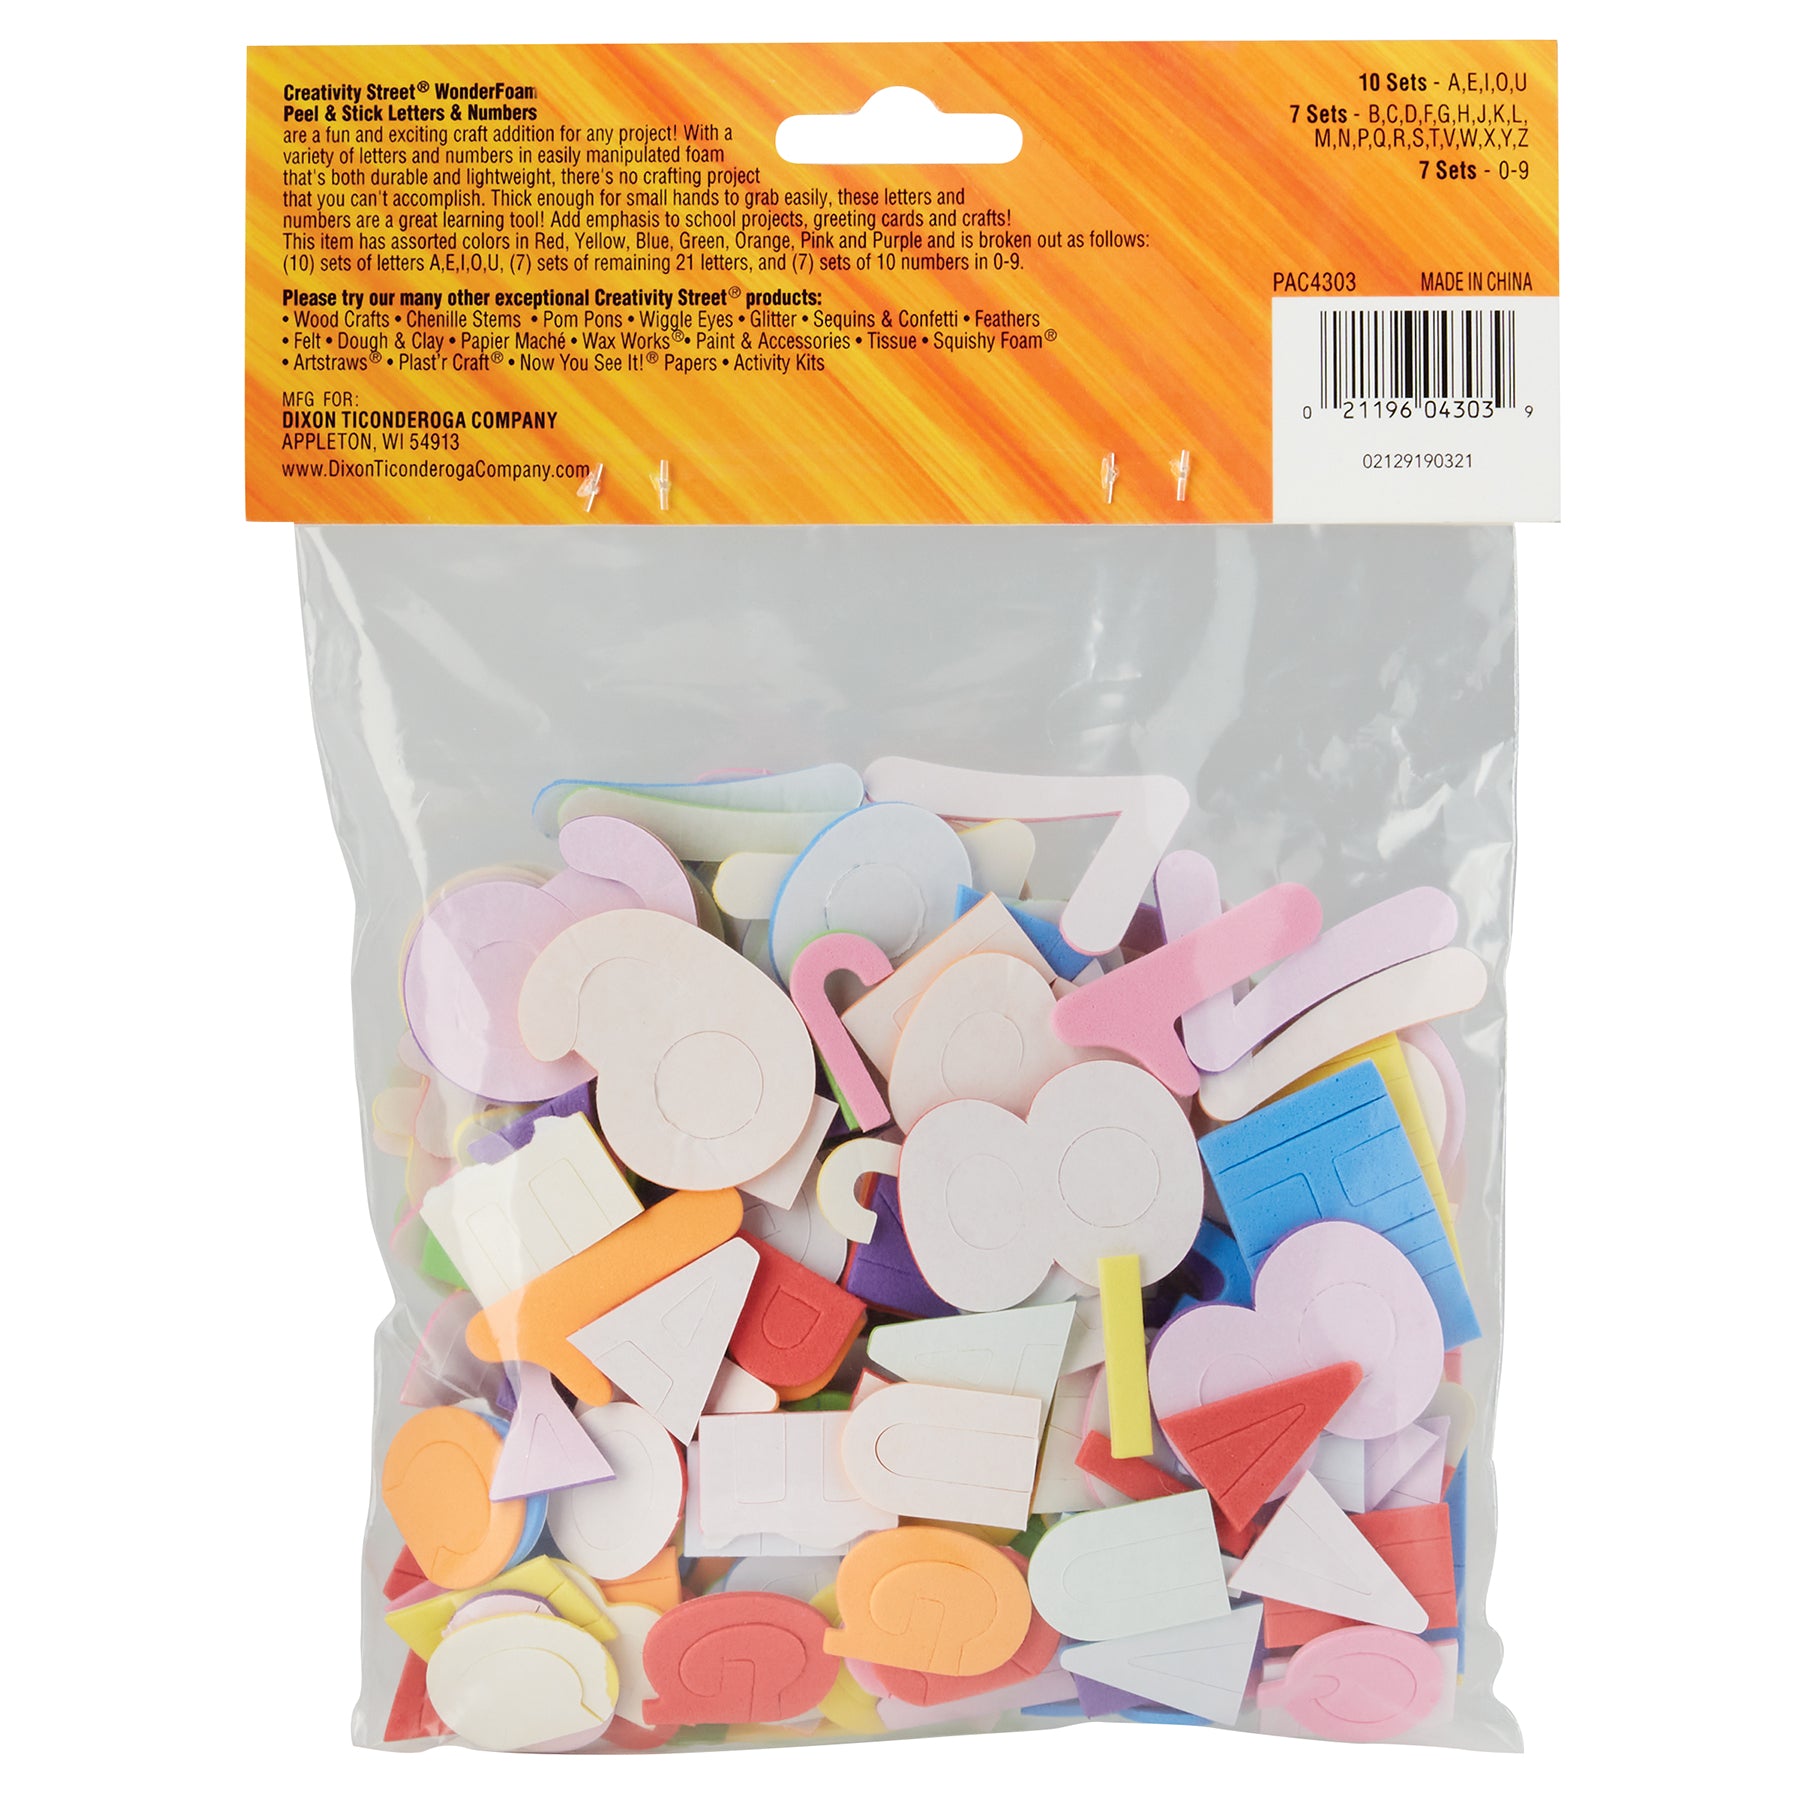 WonderFoam Peel & Stick Letters & Numbers, Assorted Colors & Sizes, 267 Pieces Per Pack, 6 Packs